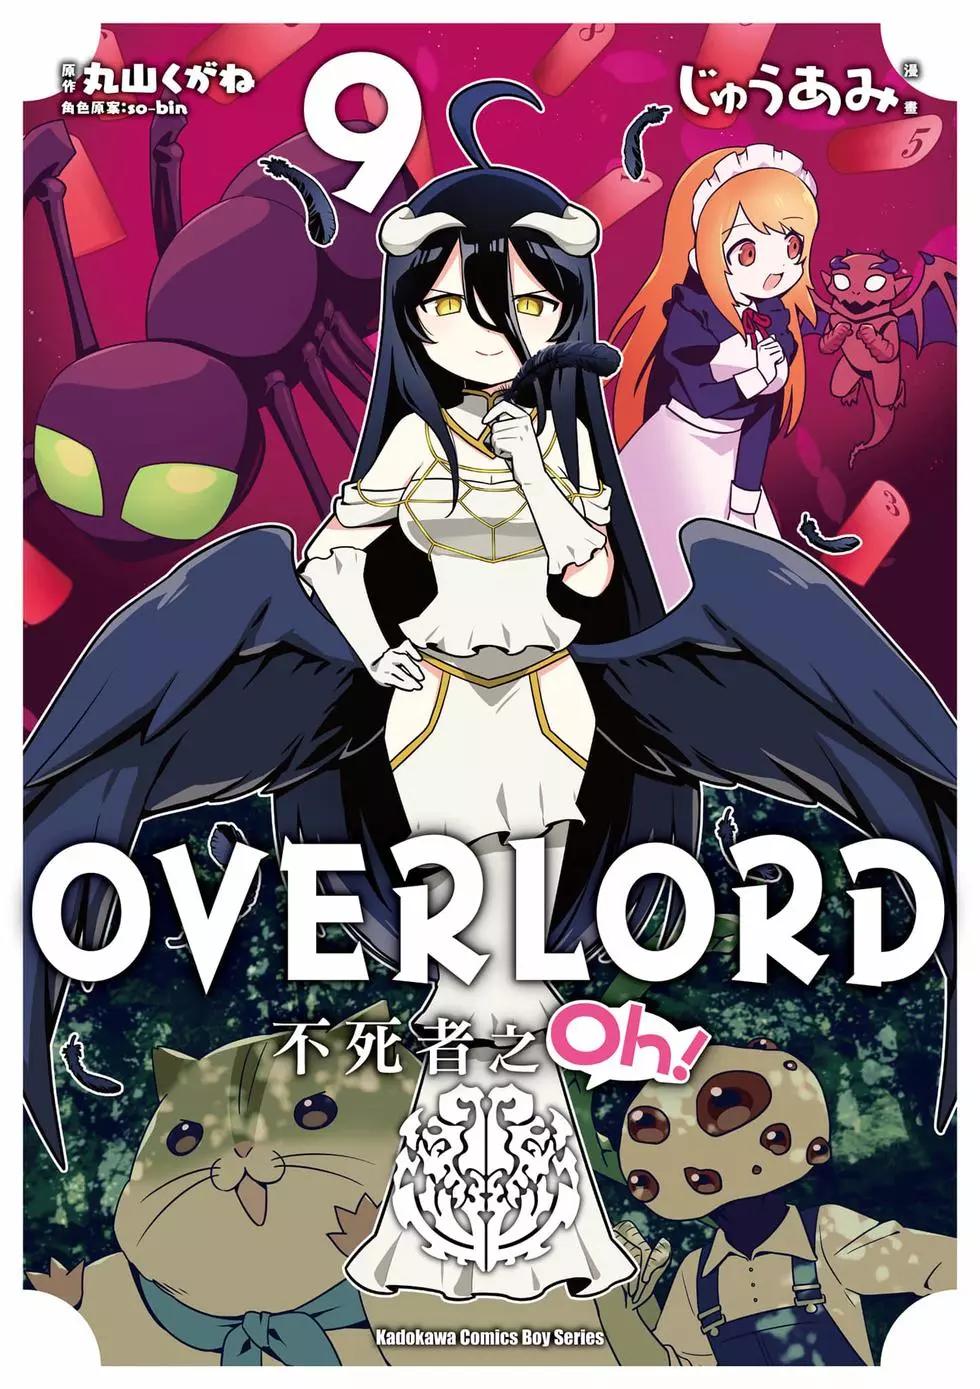 Overlord不死者之OH！ - 第09卷(1/3) - 1